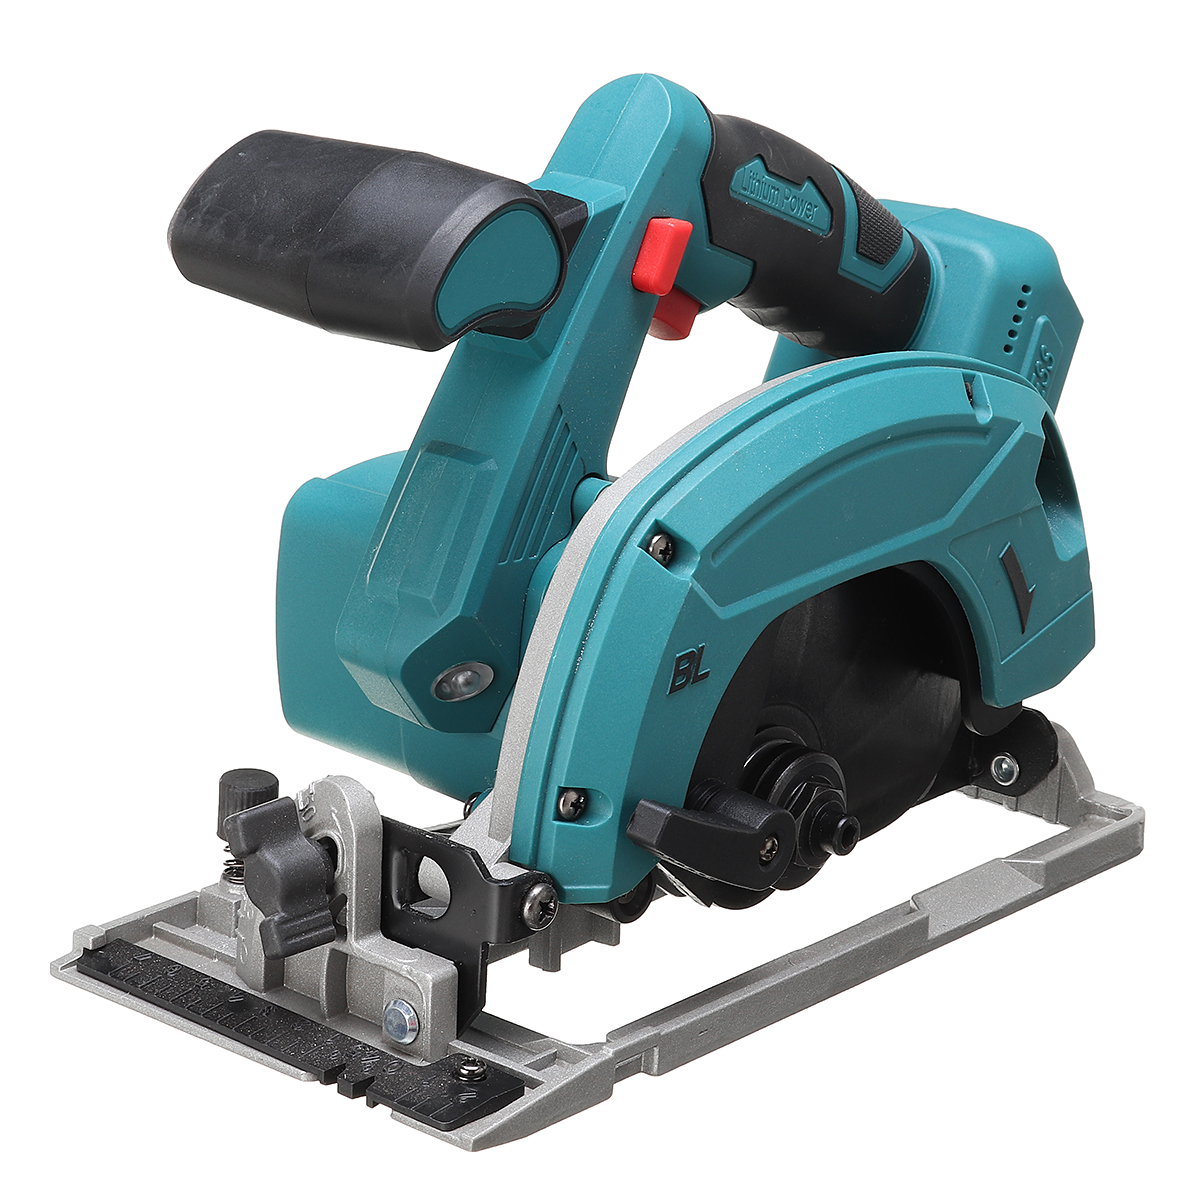 Find Electric Circular Saw Cutting Machine Handle Power Work Heavy Duty Wood Steel Cutting Tools Fit Makita 18V Battery for Sale on Gipsybee.com with cryptocurrencies